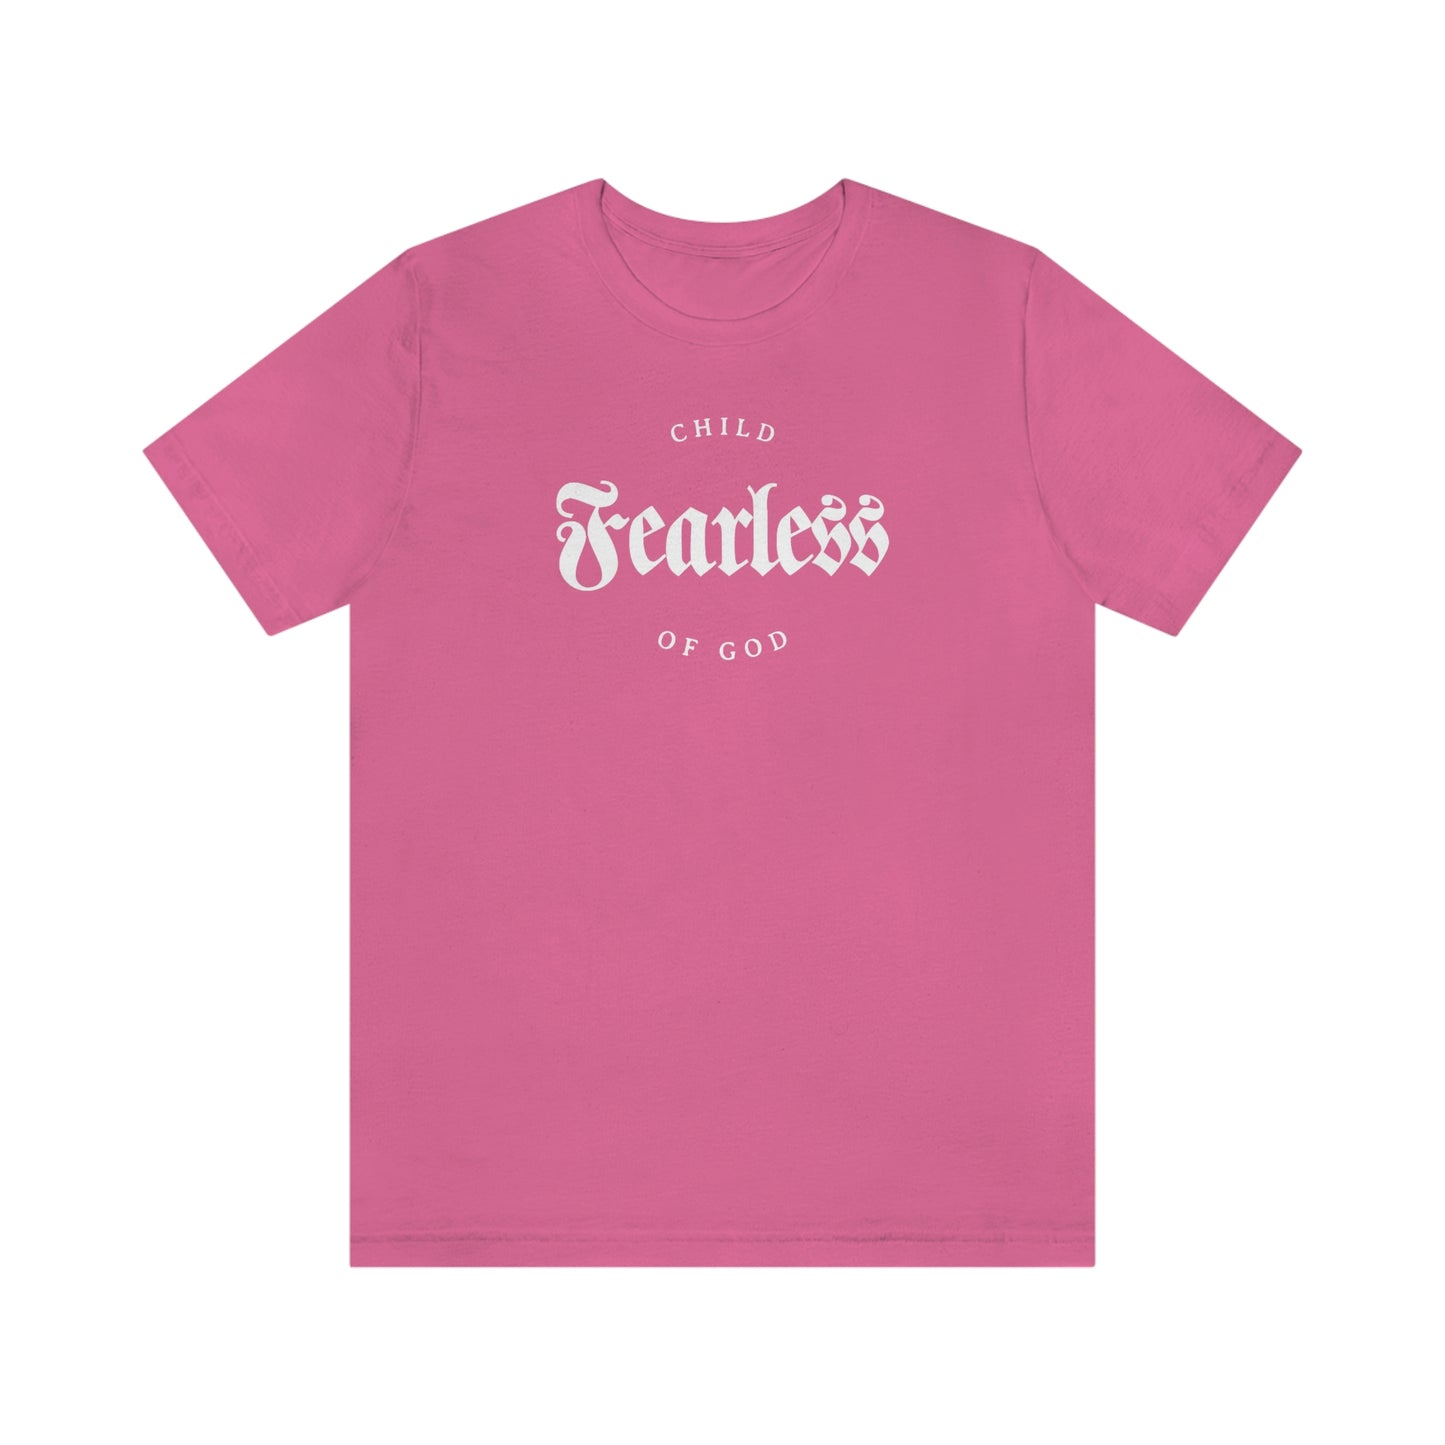 Fearless child of God woman's T-Shirt